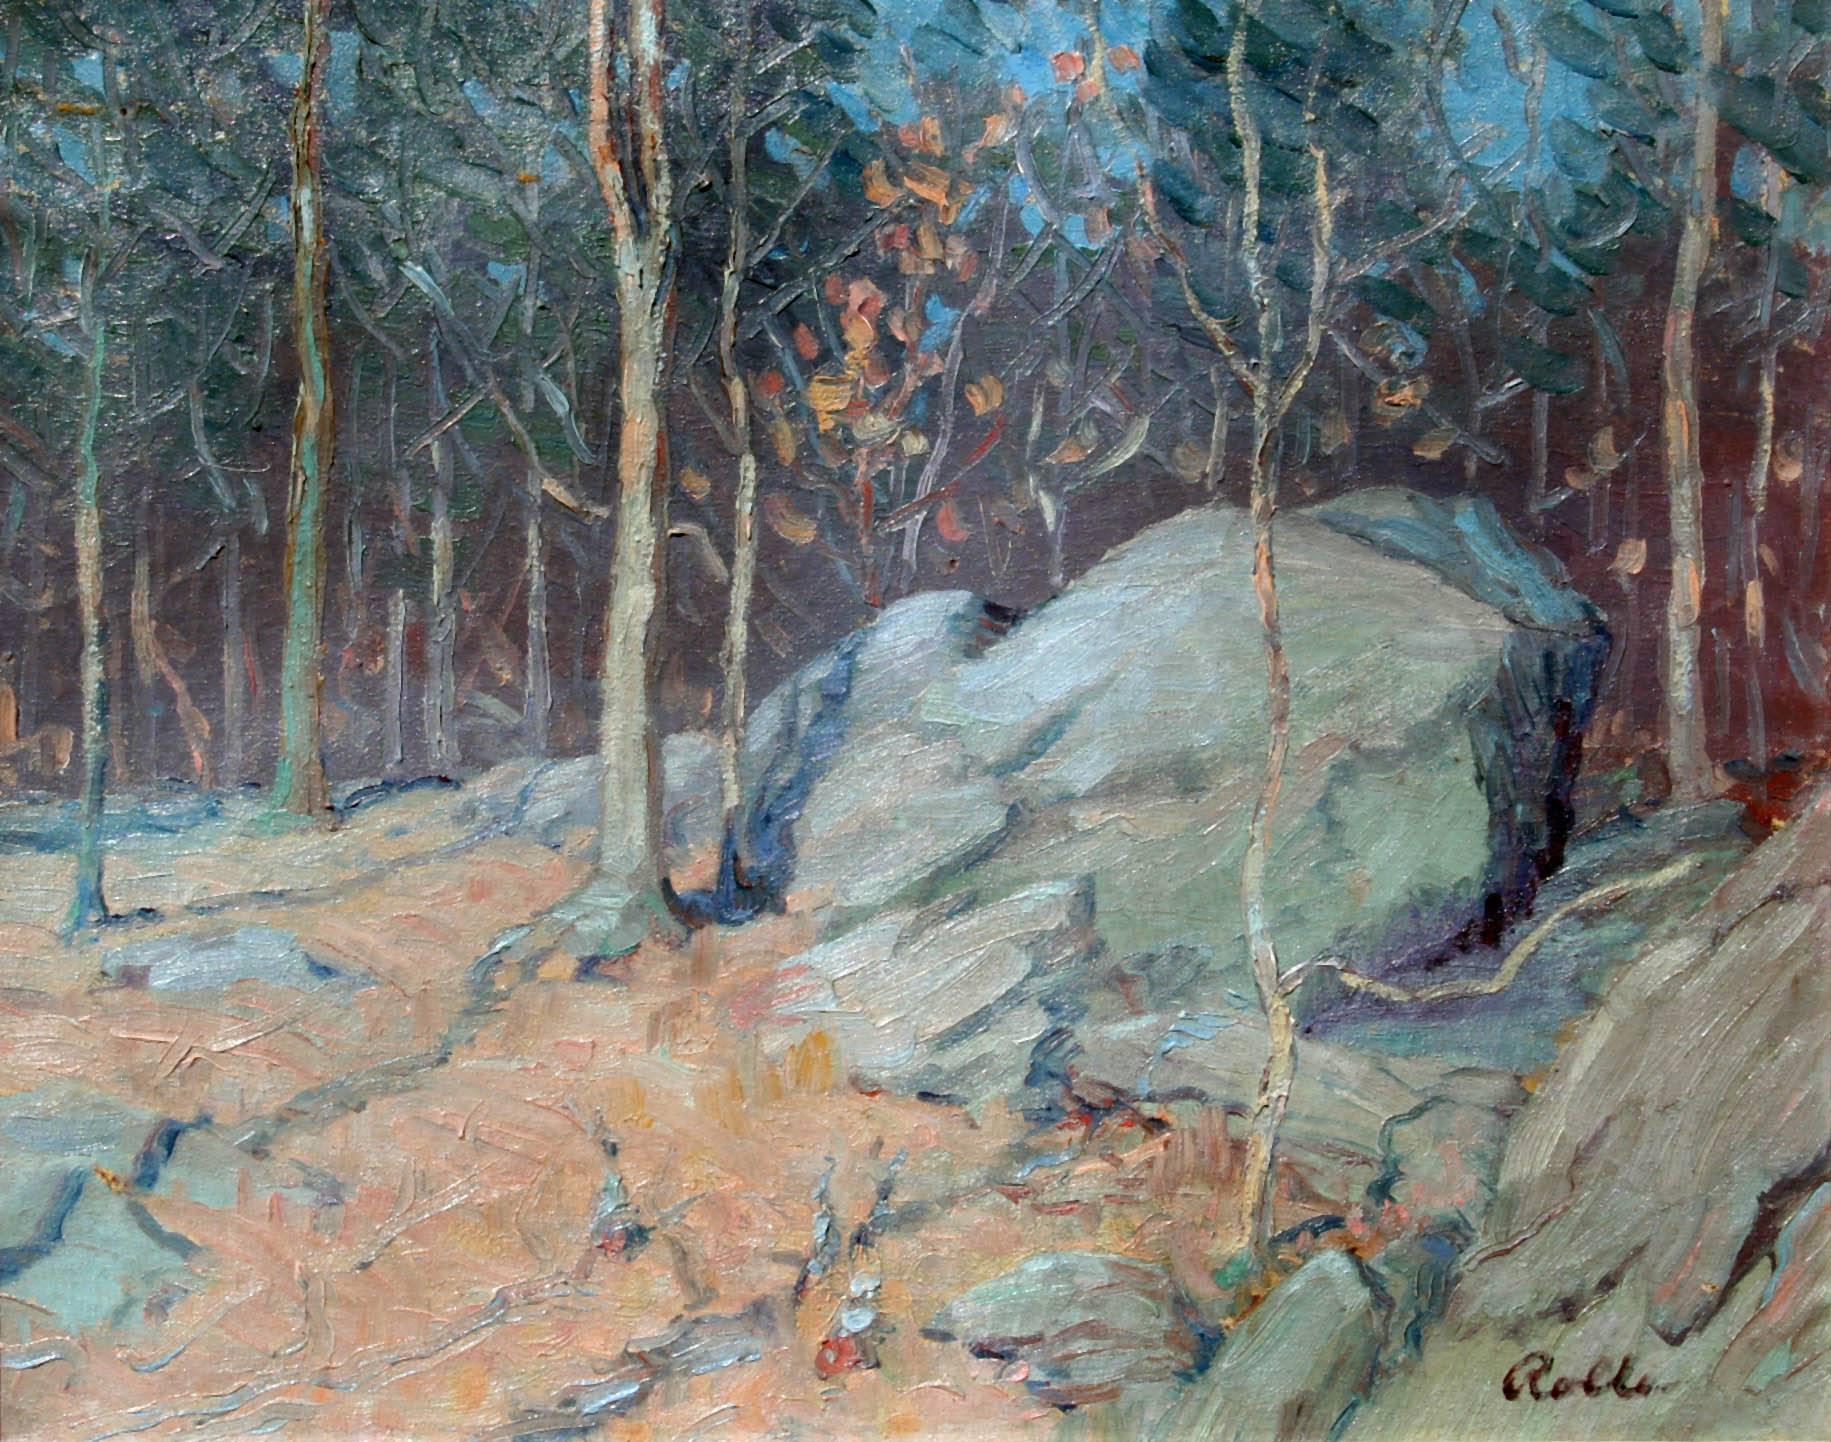 

August H. O. Rolle.
(American 1875-1941).

Rock creek park.

Oil-on-canvas, signed lower left.

$3950.
 
Painting: 16” x 20”.
Frame: 23” x 26 ½”.

August Herman Olson Rolle, painter, printmaker and graphic artist, dabbled in many